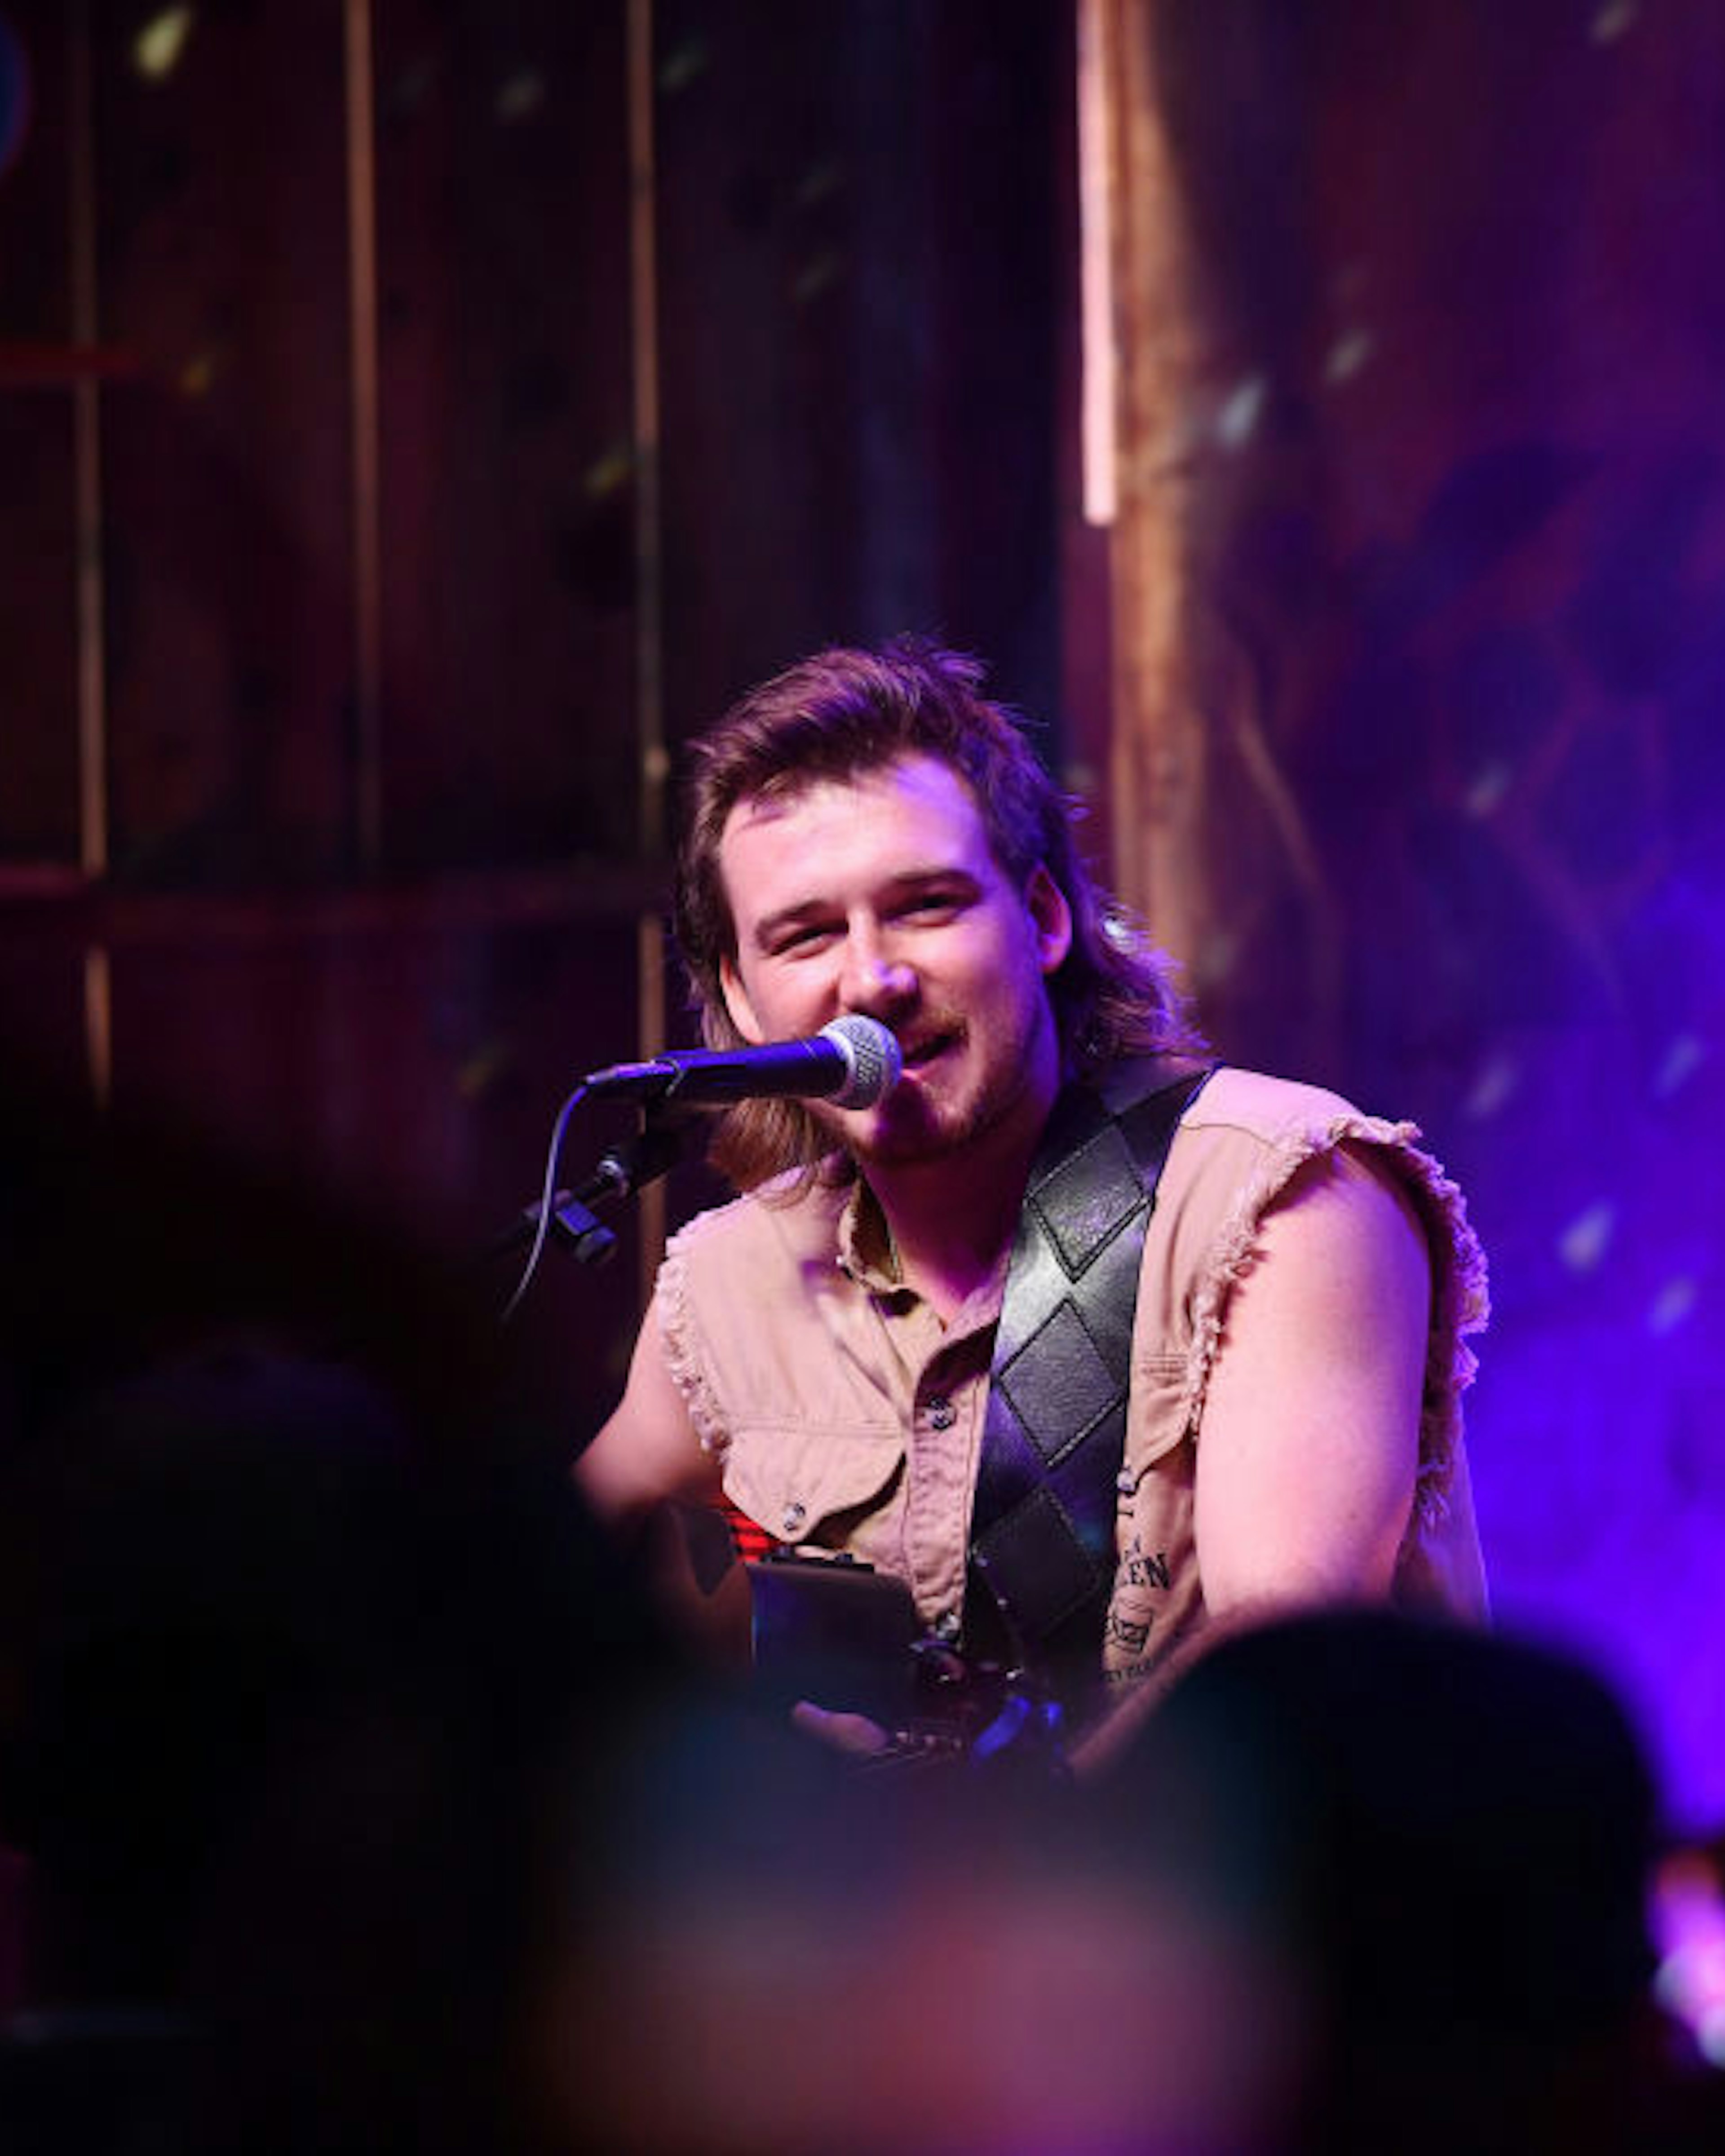 NASHVILLE, TENNESSEE - JUNE 06: Morgan Wallen performs onstage in the HGTV Lodge at CMA Music Fest on June 06, 2019 in Nashville, Tennessee. (Photo by Jason Davis/Getty Images for HGTV)